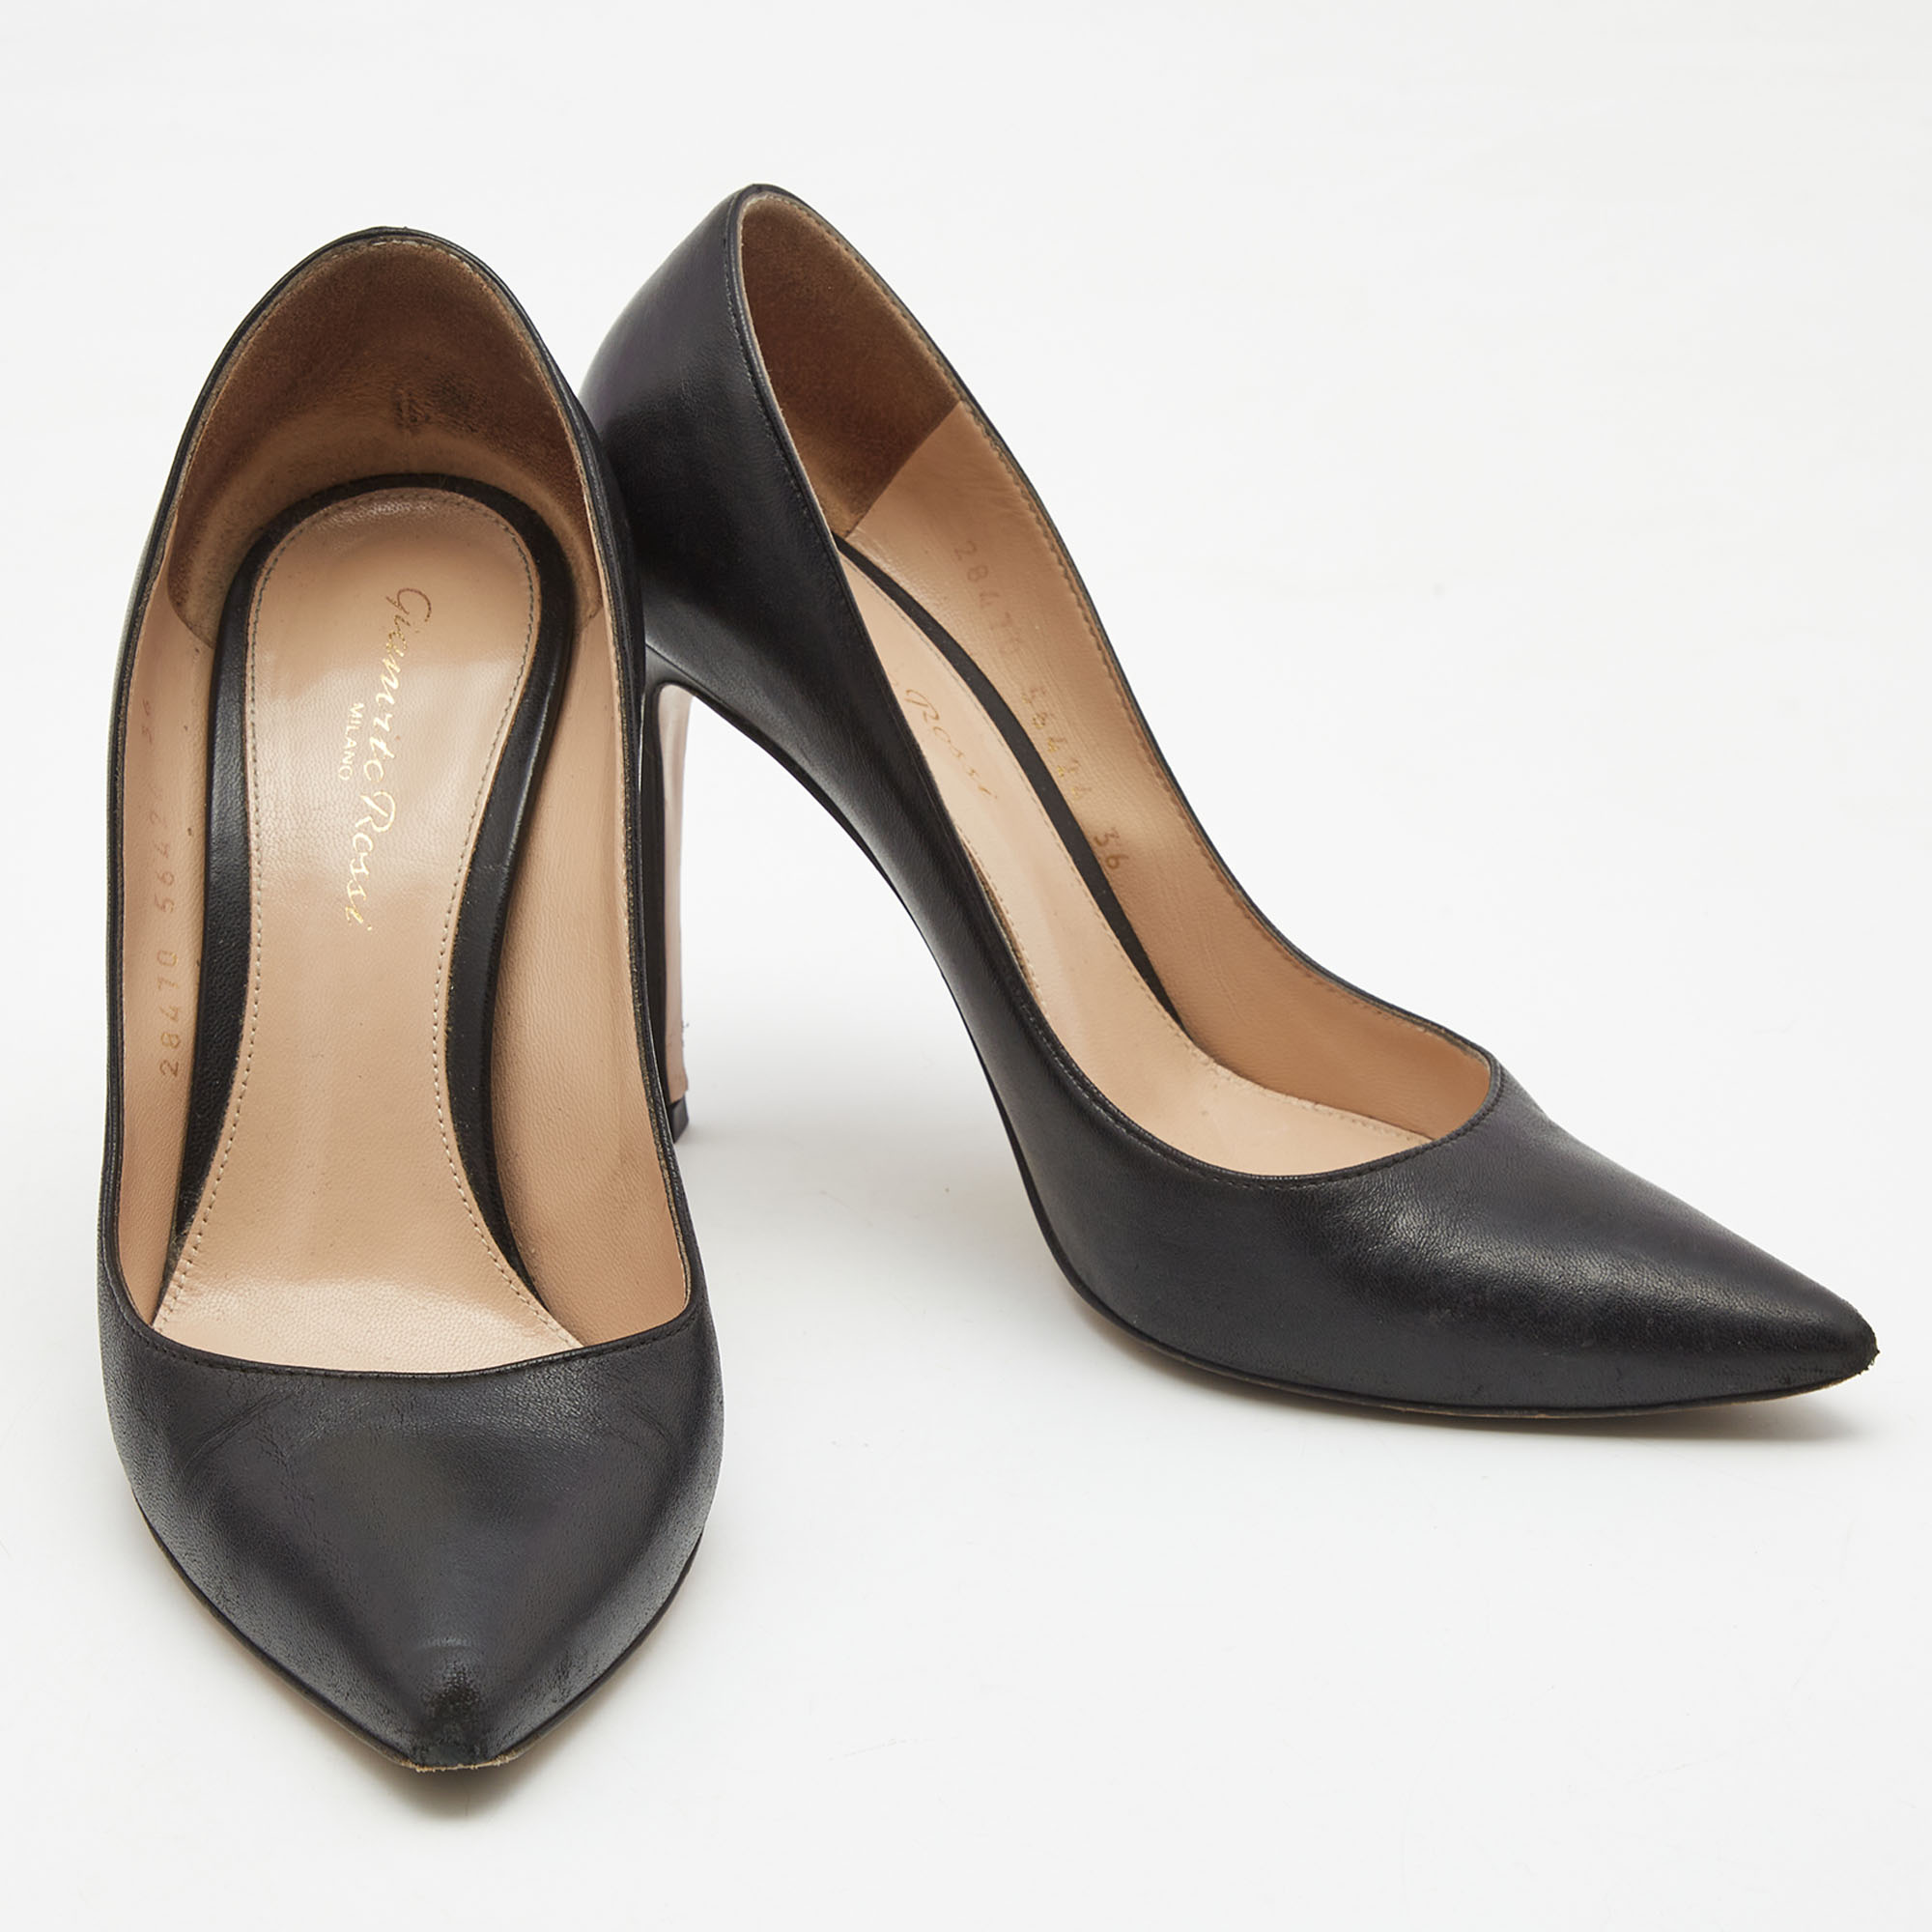 Gianvito Rossi Black Leather Pointed Toe Pumps Size 36